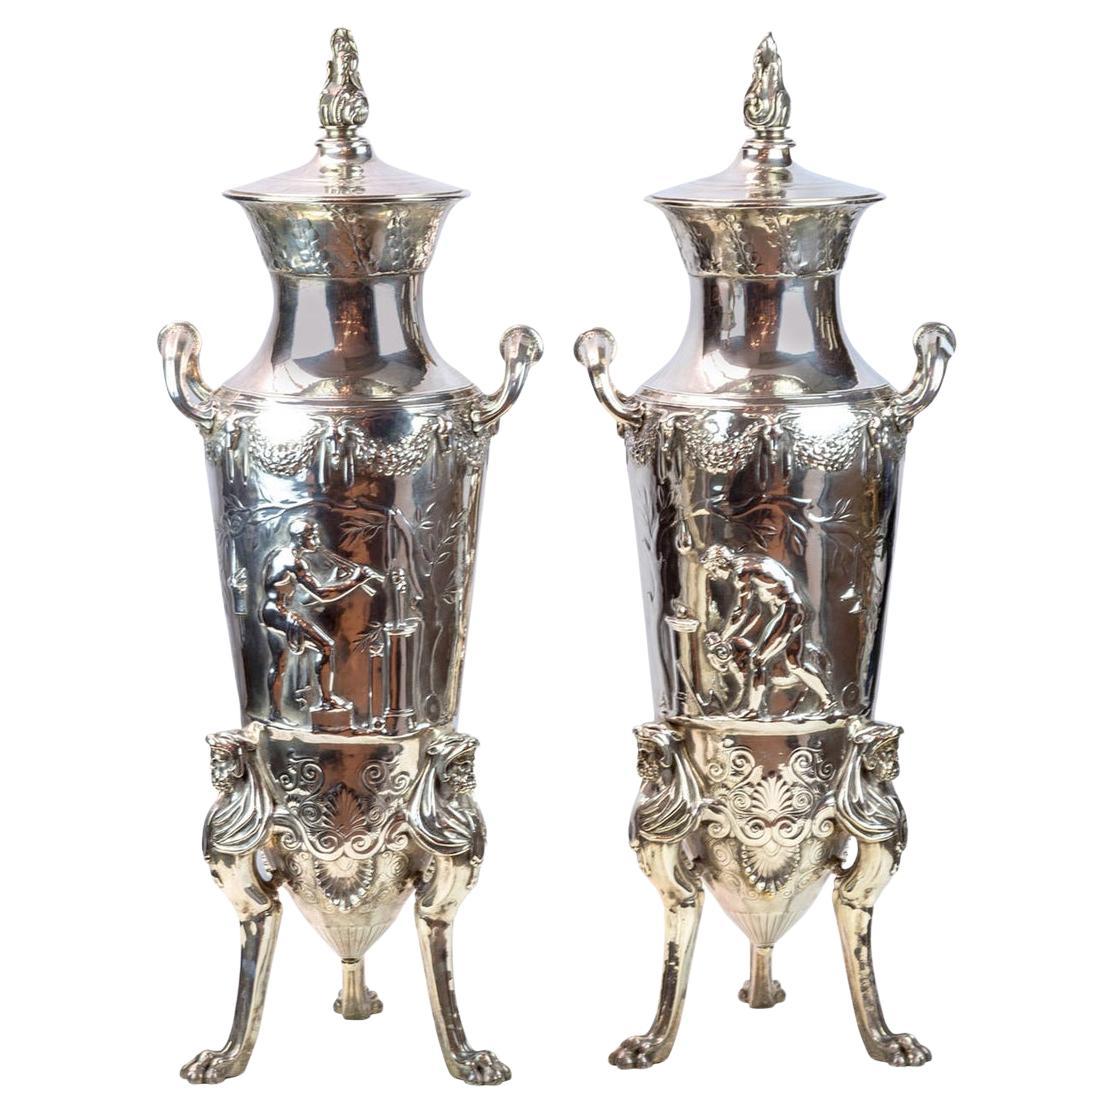 A Very Fine Pair of Silvered Bronze Lamps attributed to Ferdinand Levillain